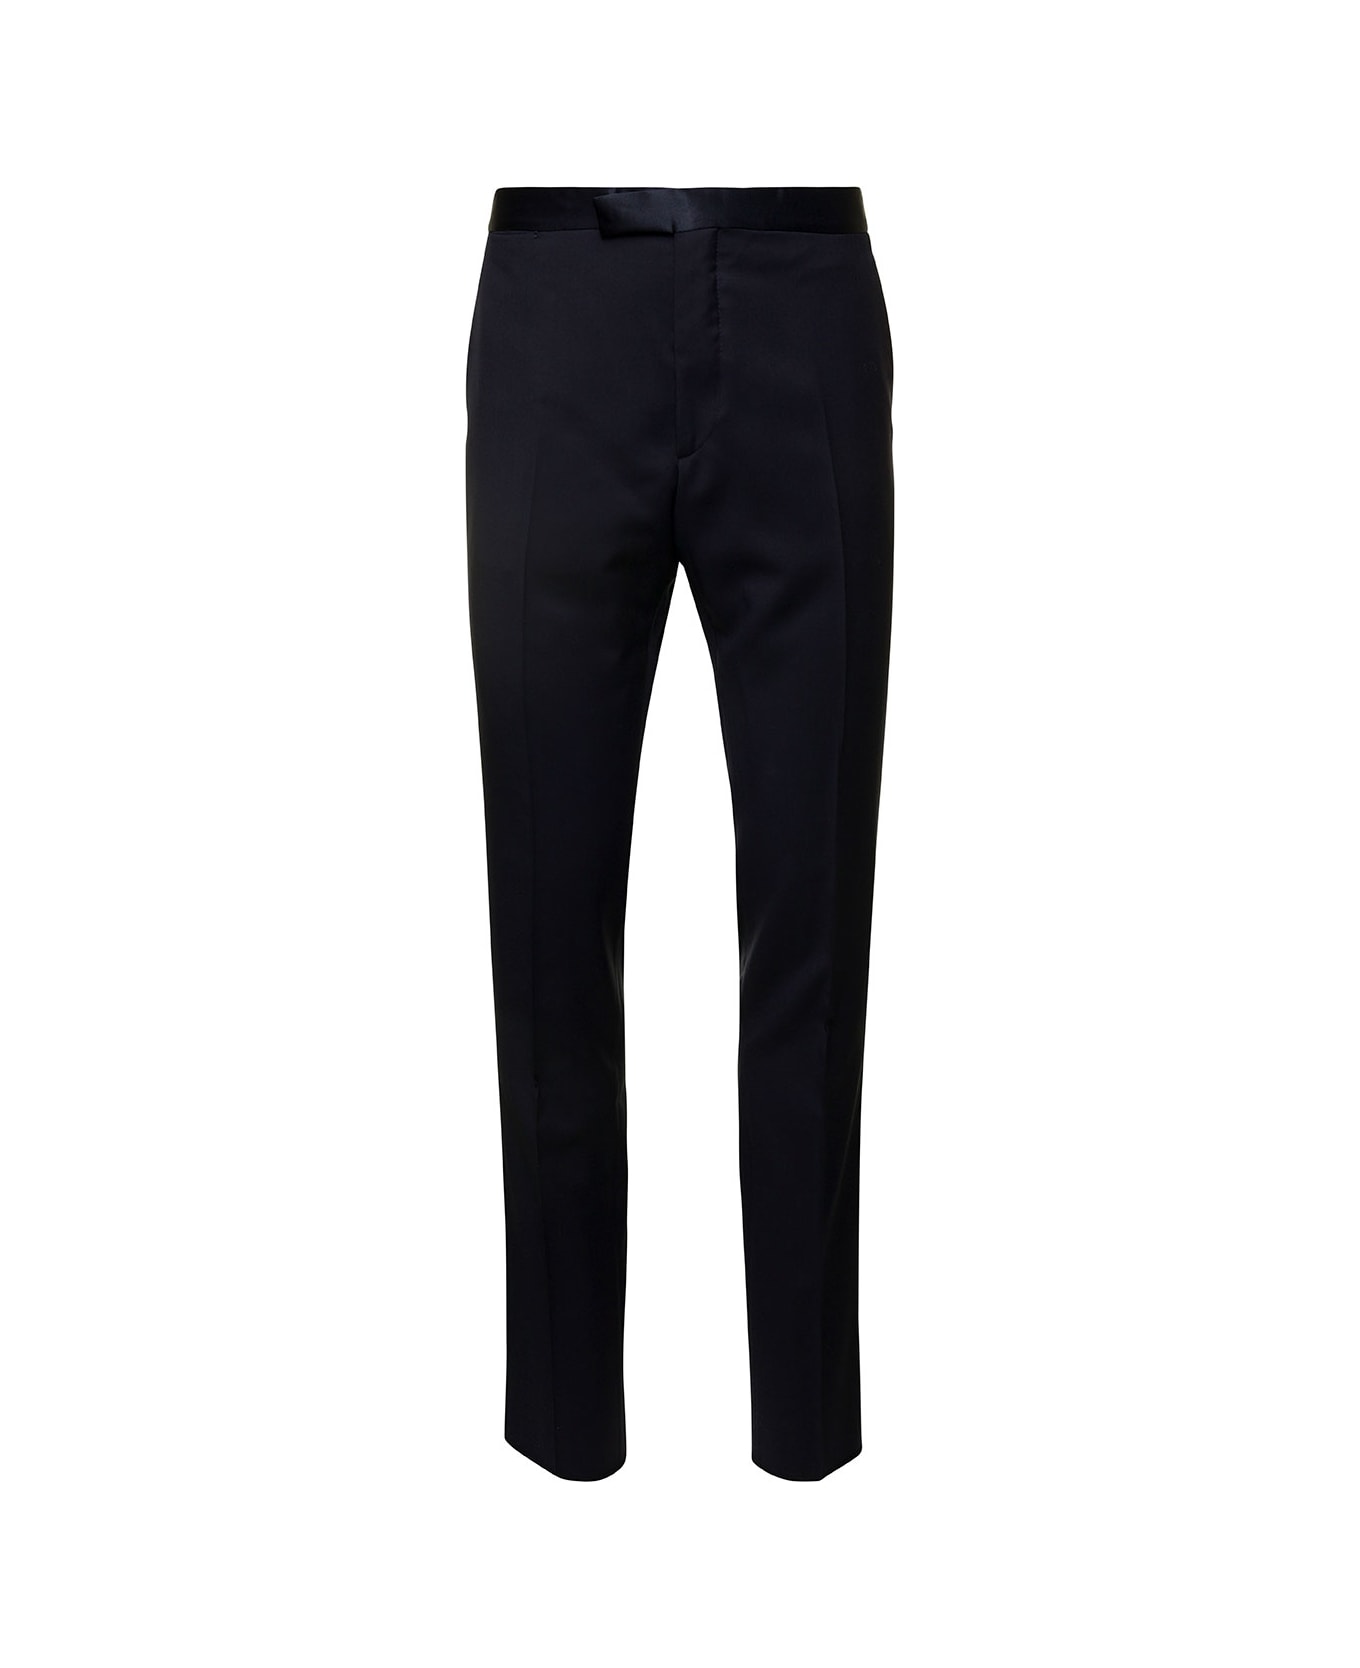 Tagliatore Blue Pants With Satin Waistband And Welt Pockets In Wool Man - Blu